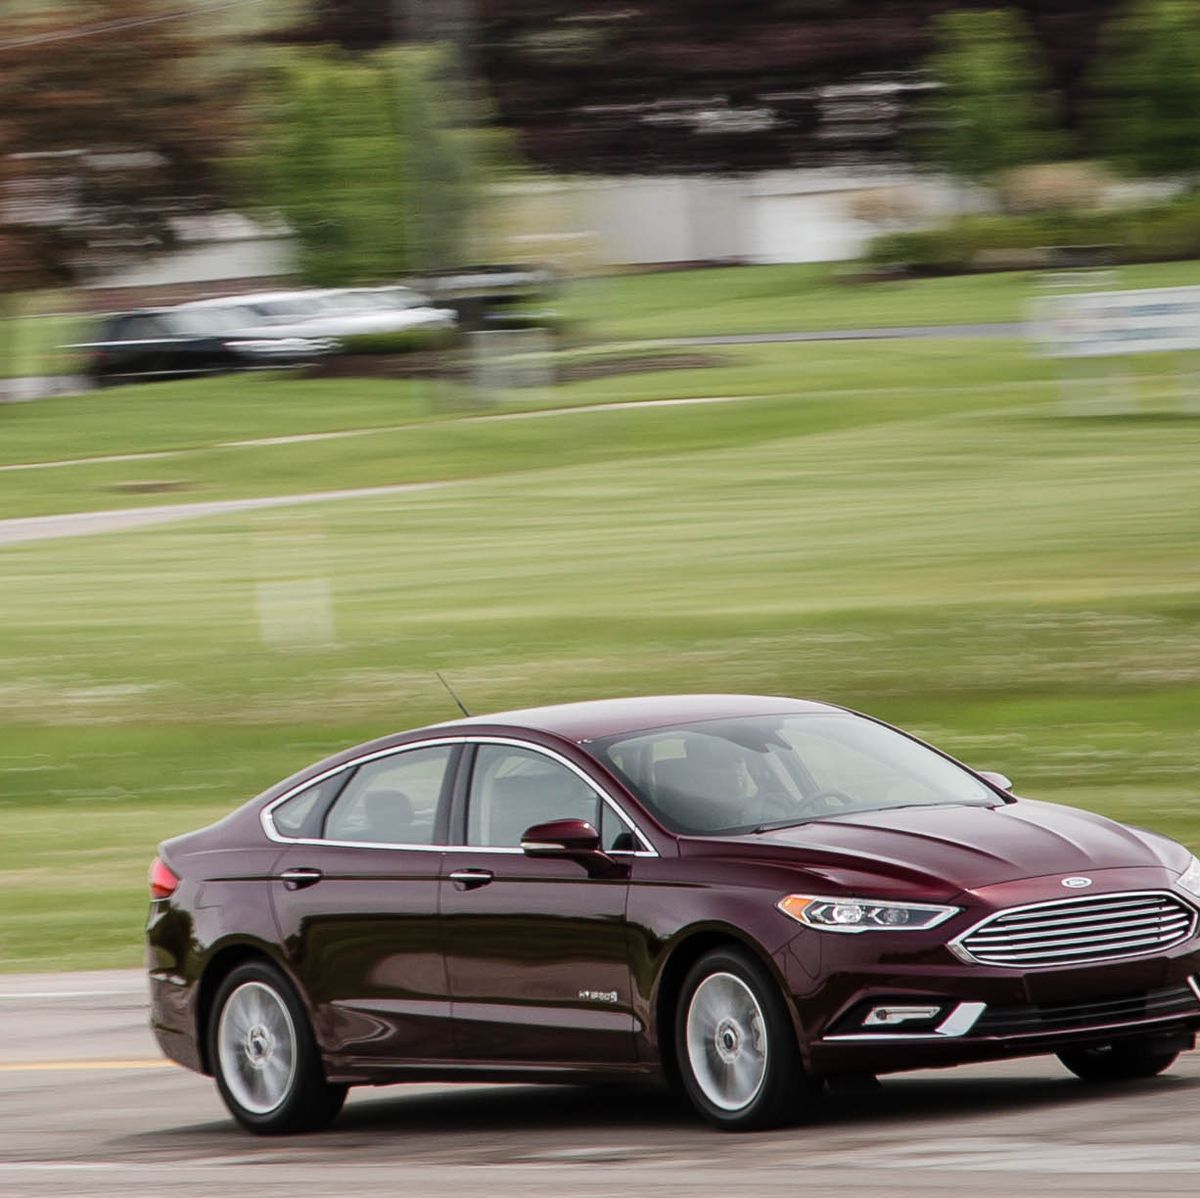 Troubleshooting: How to Put Ford Fusion in Neutral With Dead Battery